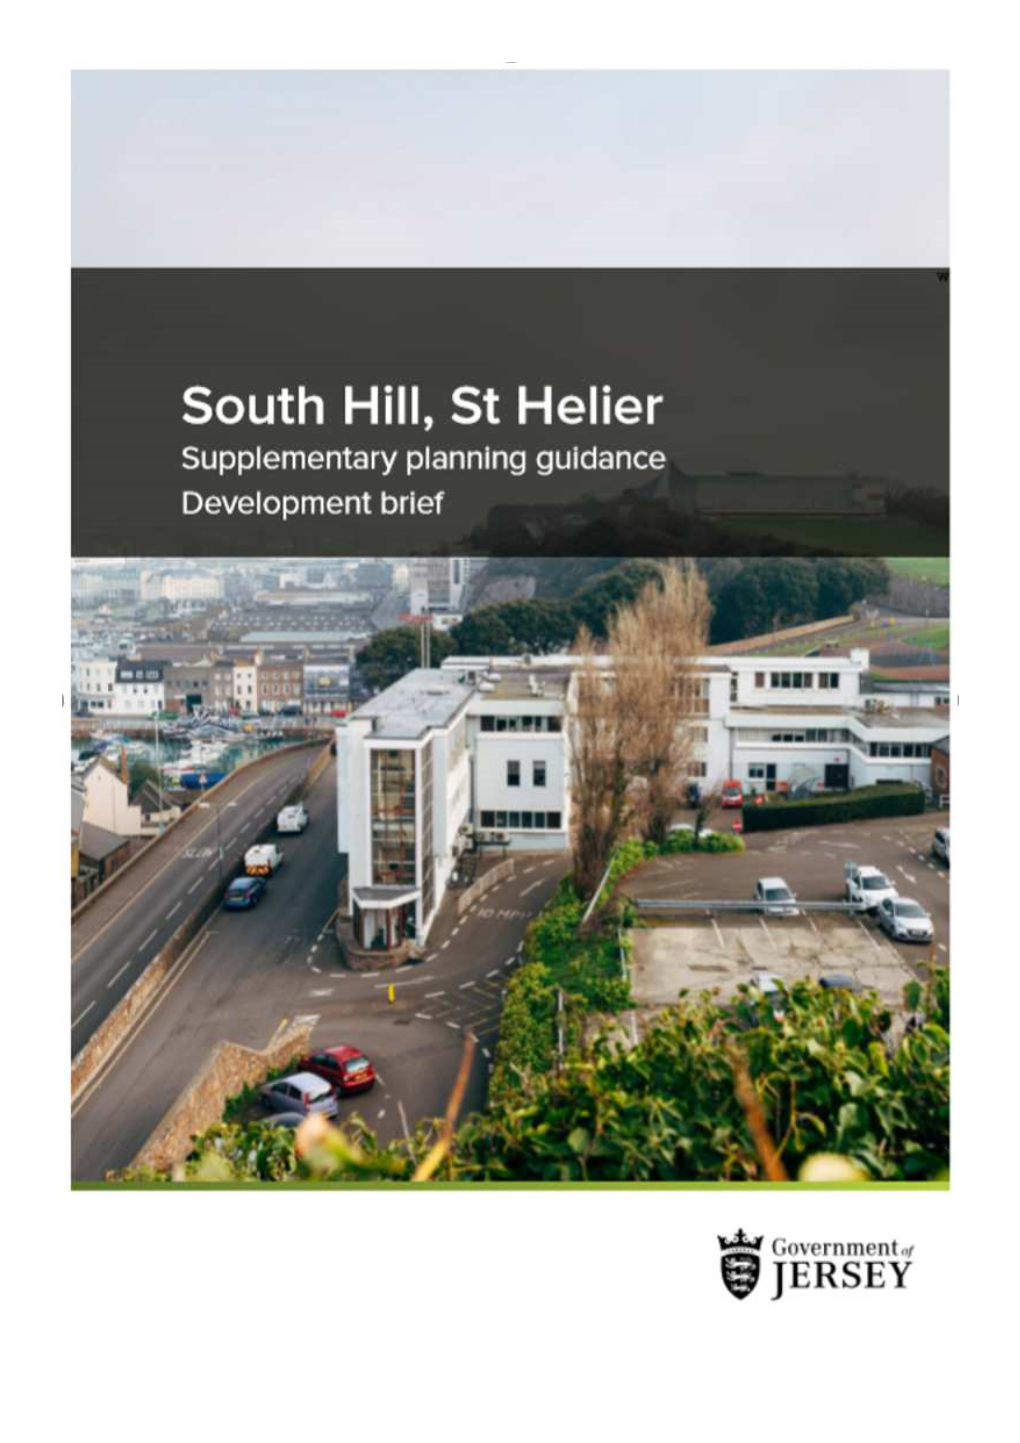 Development Brief for South Hill